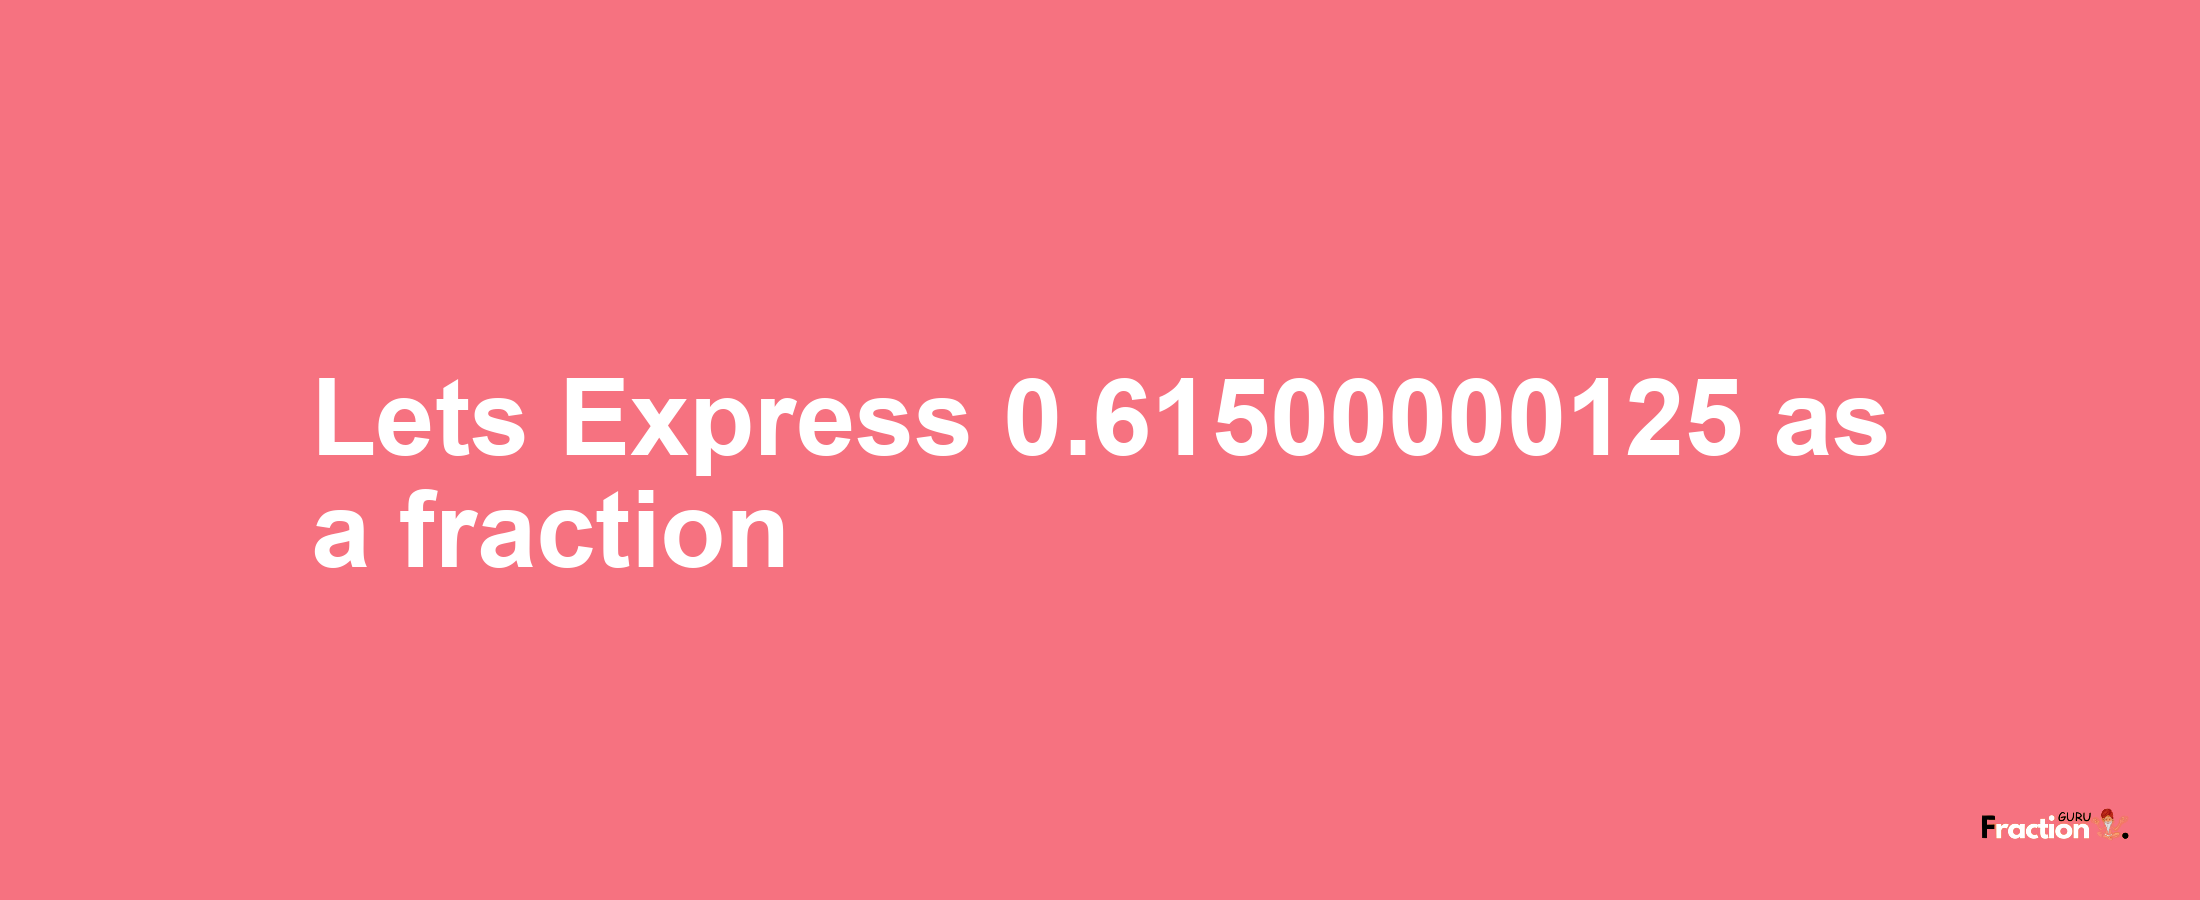 Lets Express 0.61500000125 as afraction